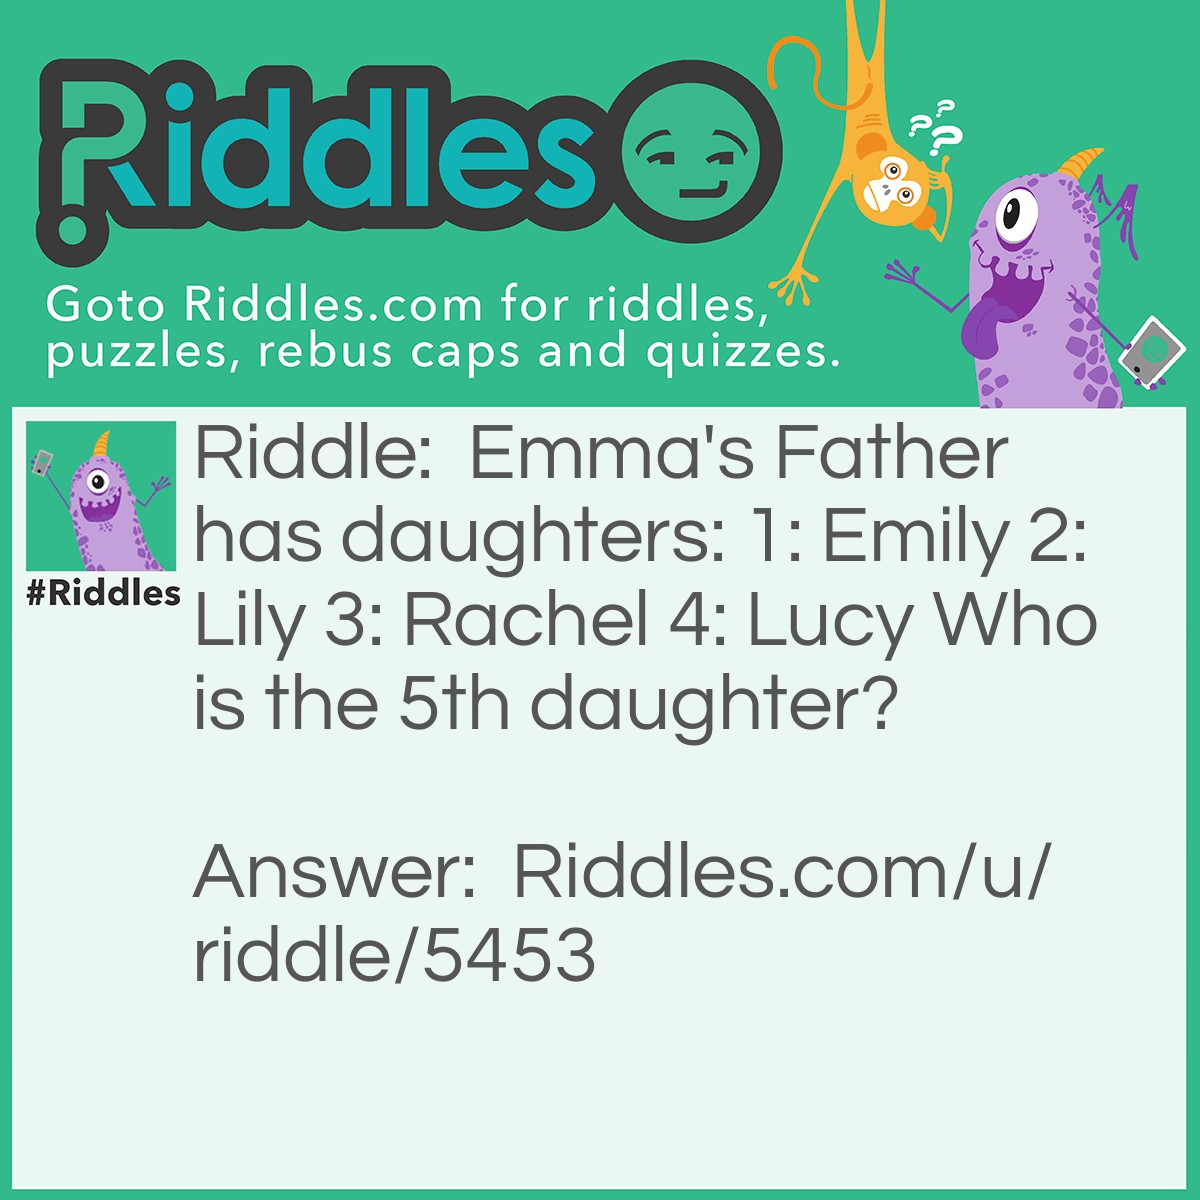 Riddle: Emma's Father has daughters: 1: Emily 2: Lily 3: Rachel 4: Lucy Who is the 5th daughter? Answer: Emma Because it said Emma's Father and Emma is a daughter. They only list four.